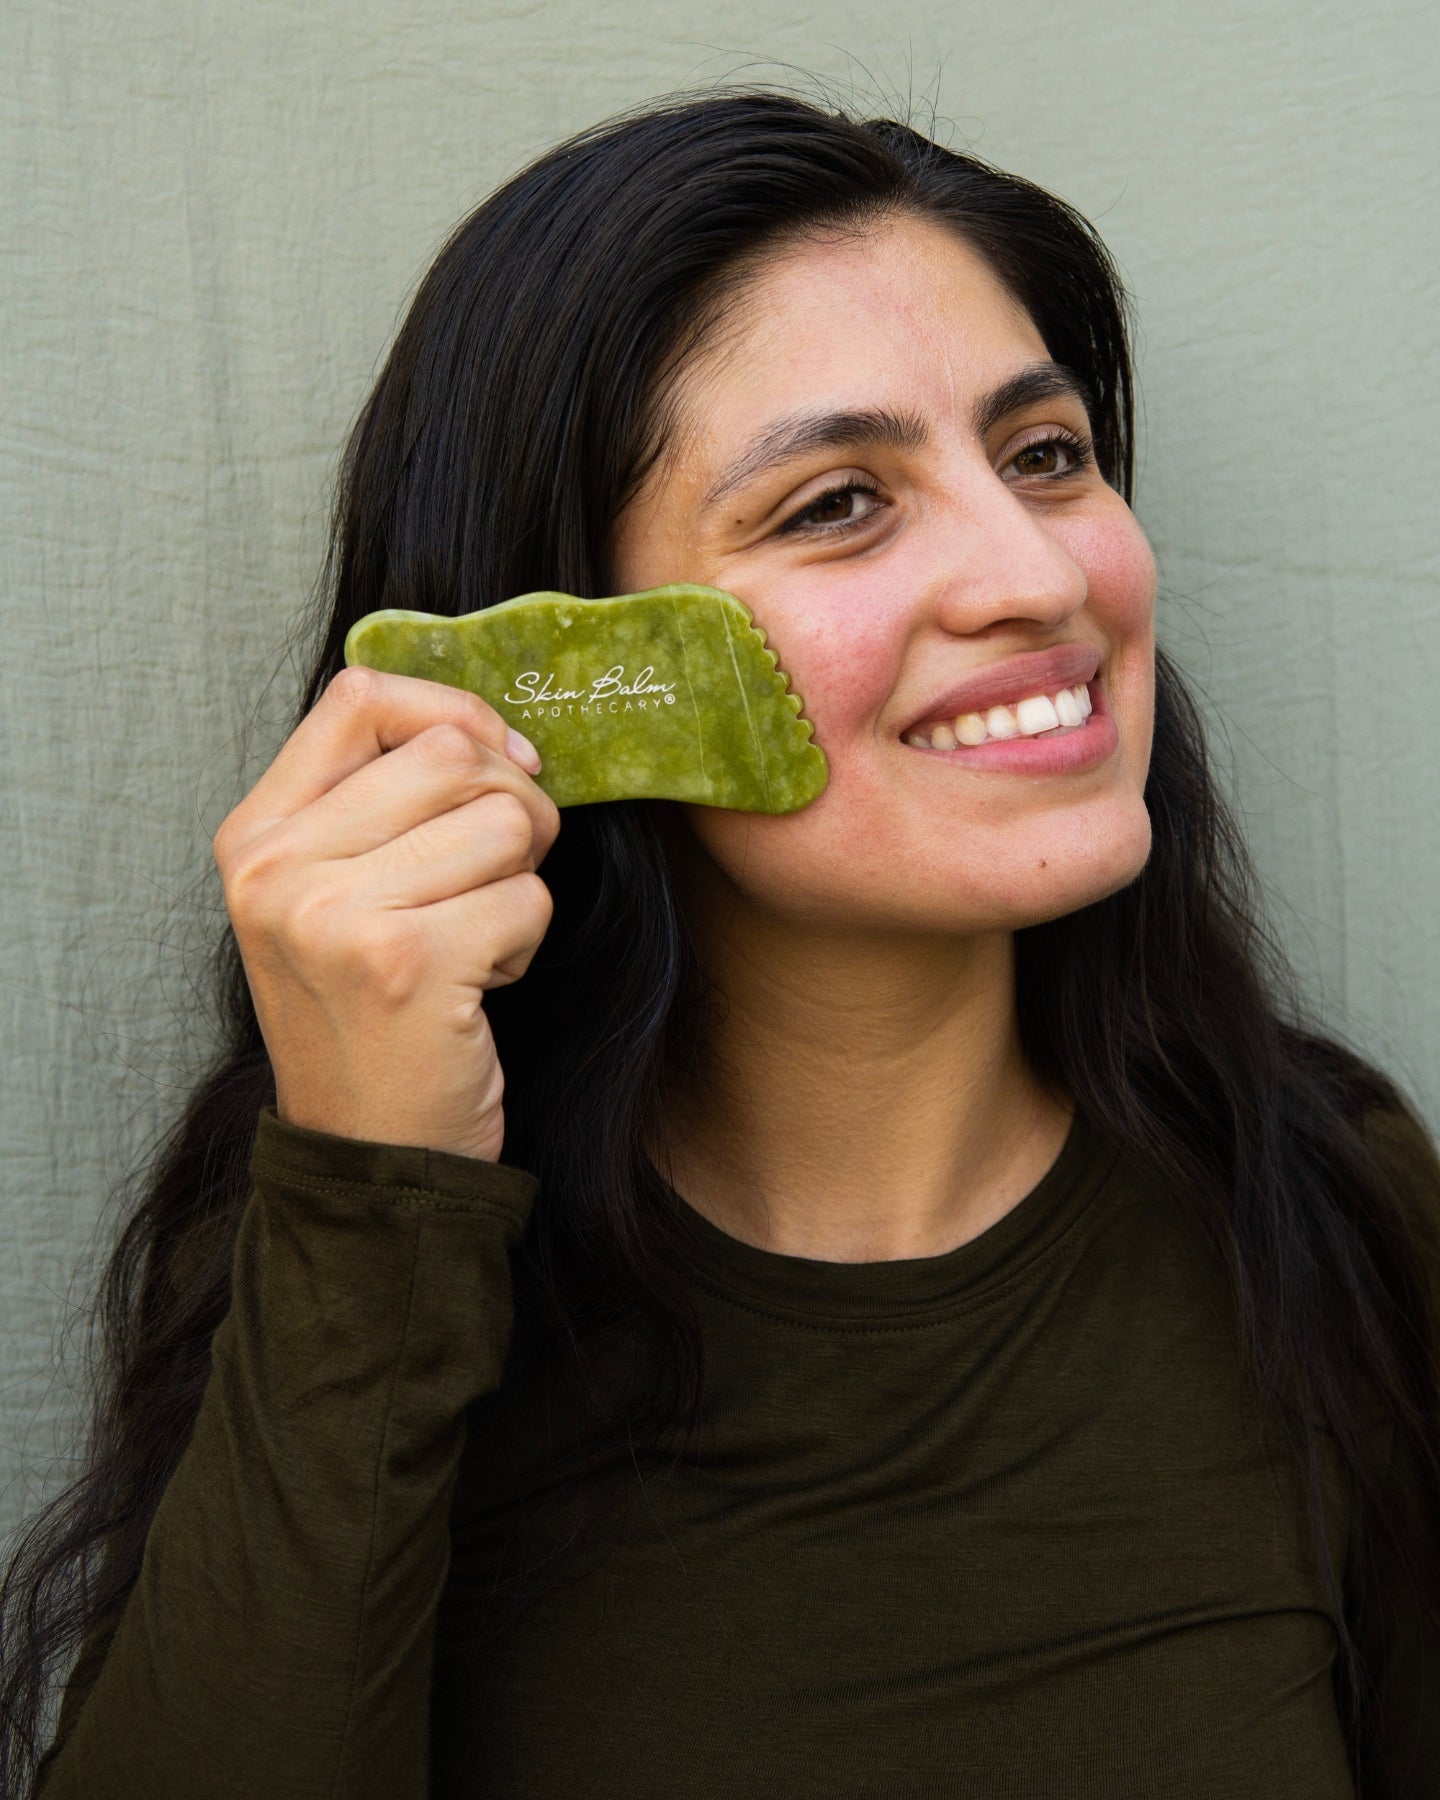 A smiling woman uses the Jade Facial Stone on her face.